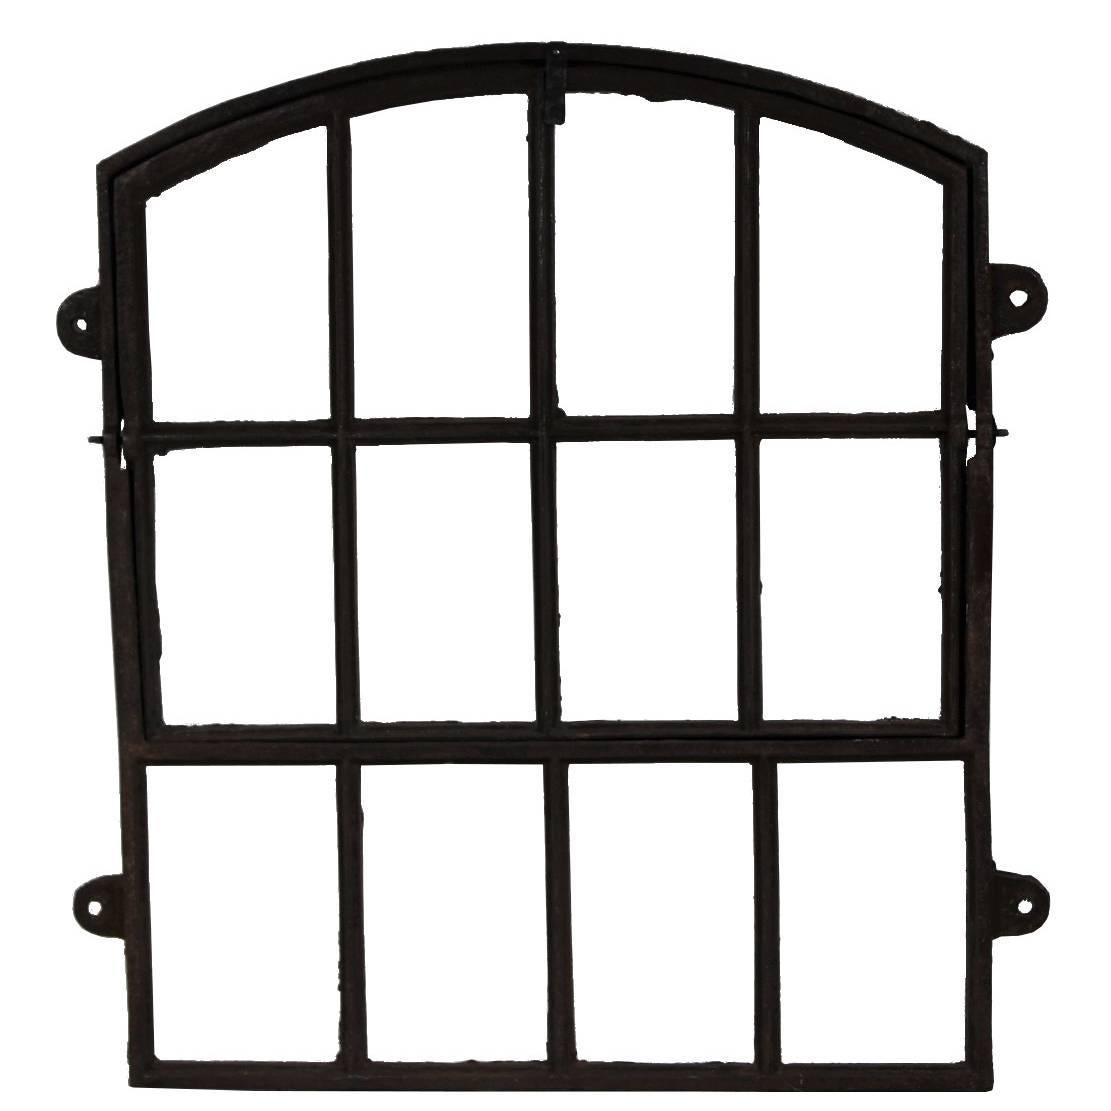 19th Century Industrial Iron Window Frame, 20 pcs available